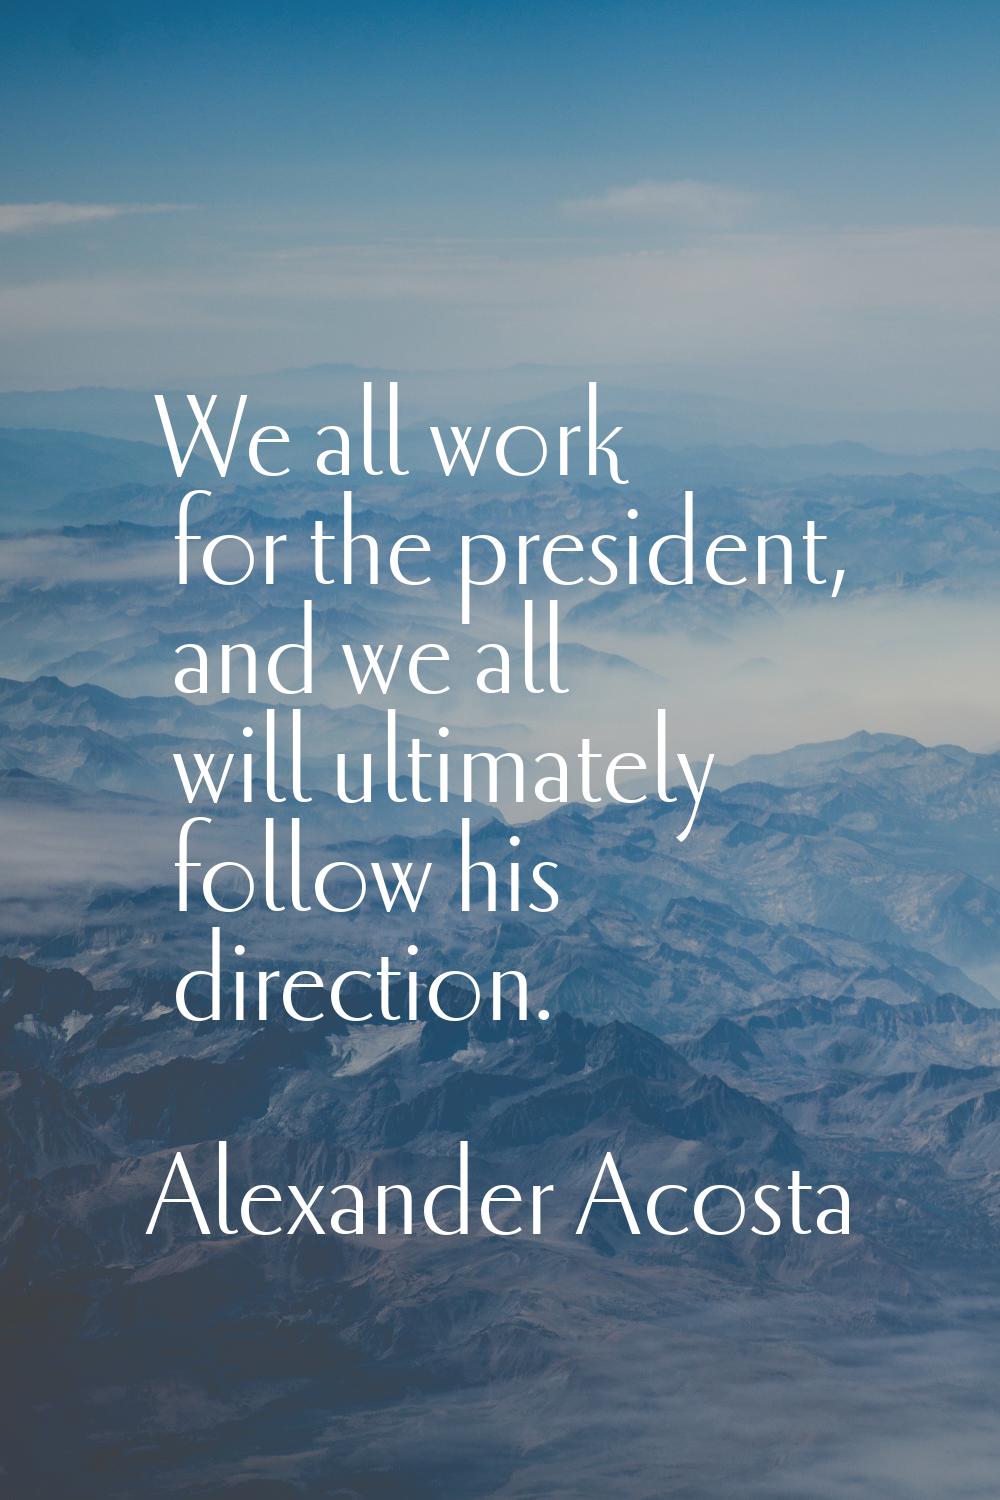 We all work for the president, and we all will ultimately follow his direction.